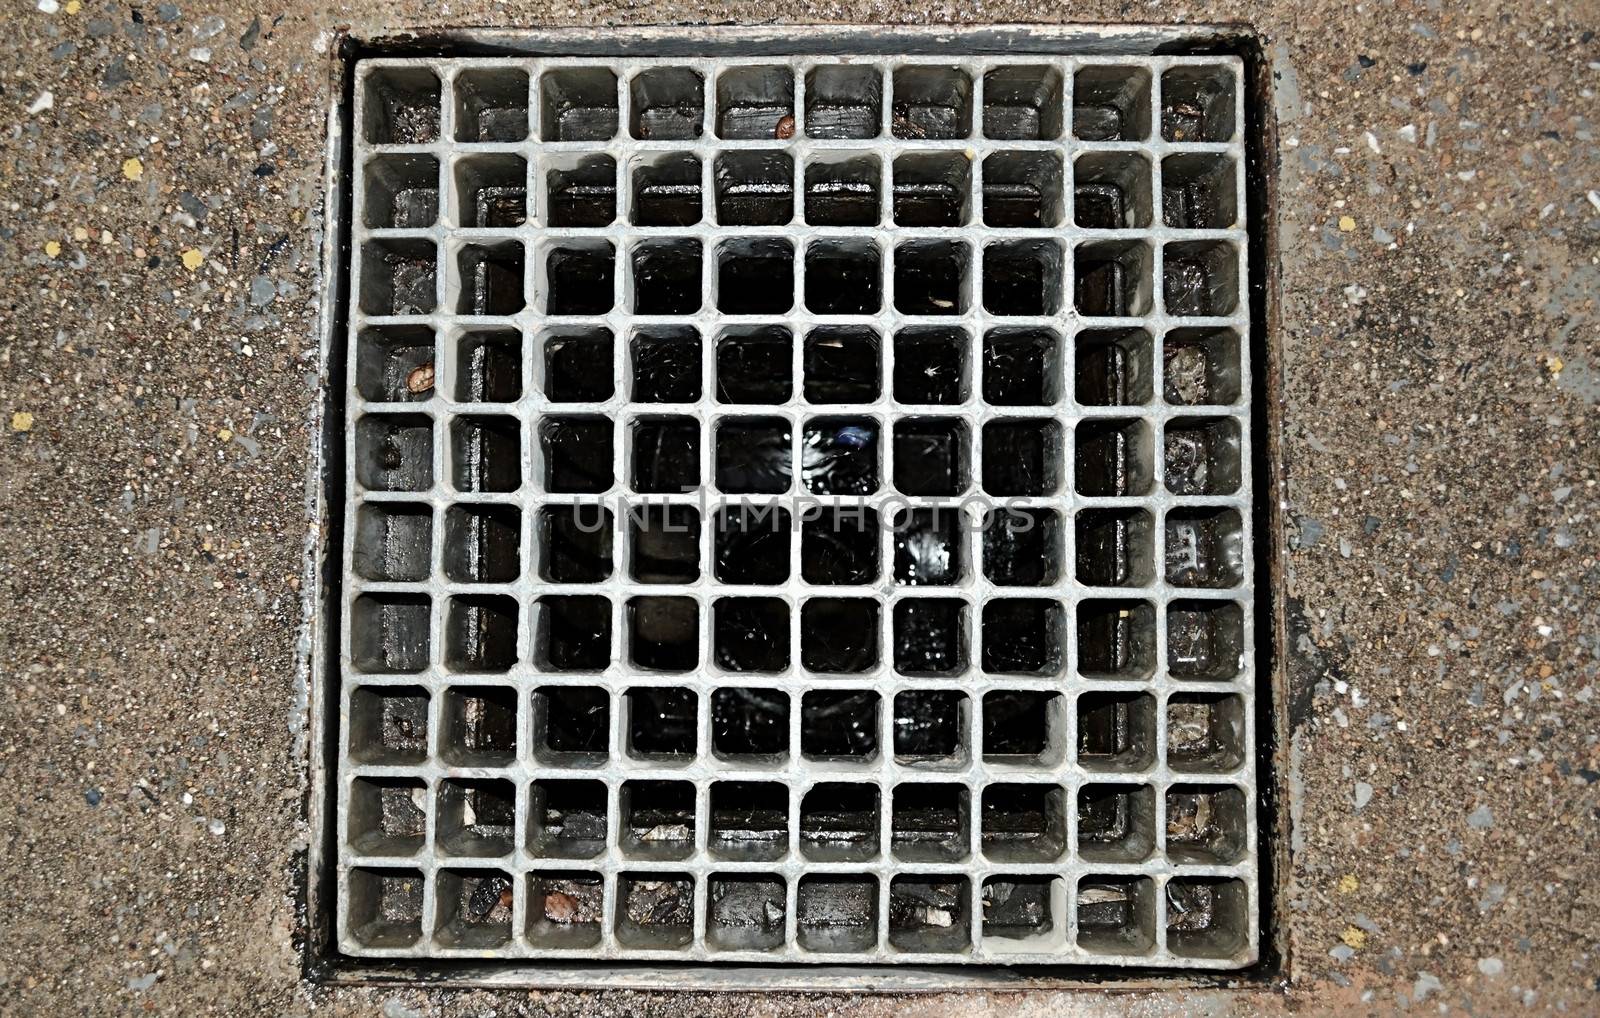 Sewer grate on the road in city